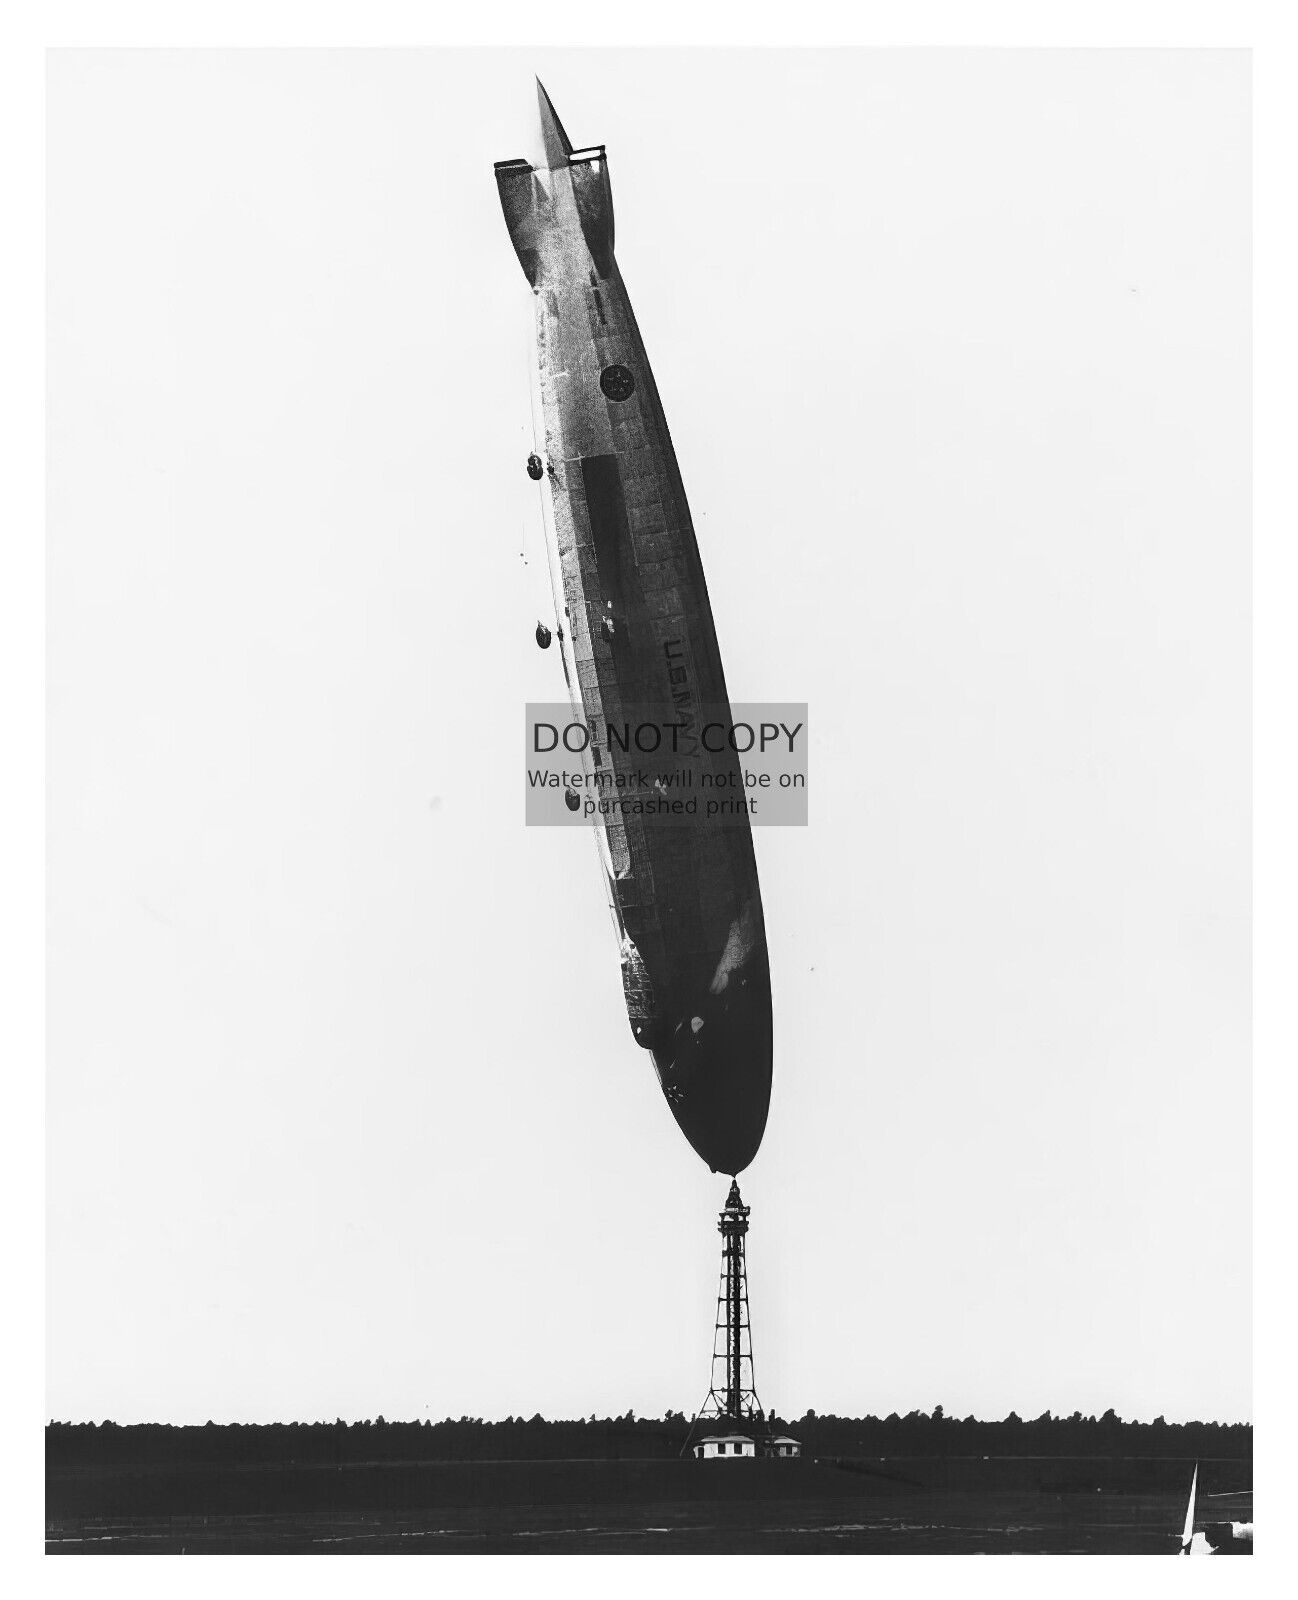 USS LOS ANGELES RIGID AIRSHIP ZR-3 FLYING VERTICAL PUSHED BY WIND 8X10 PHOTO